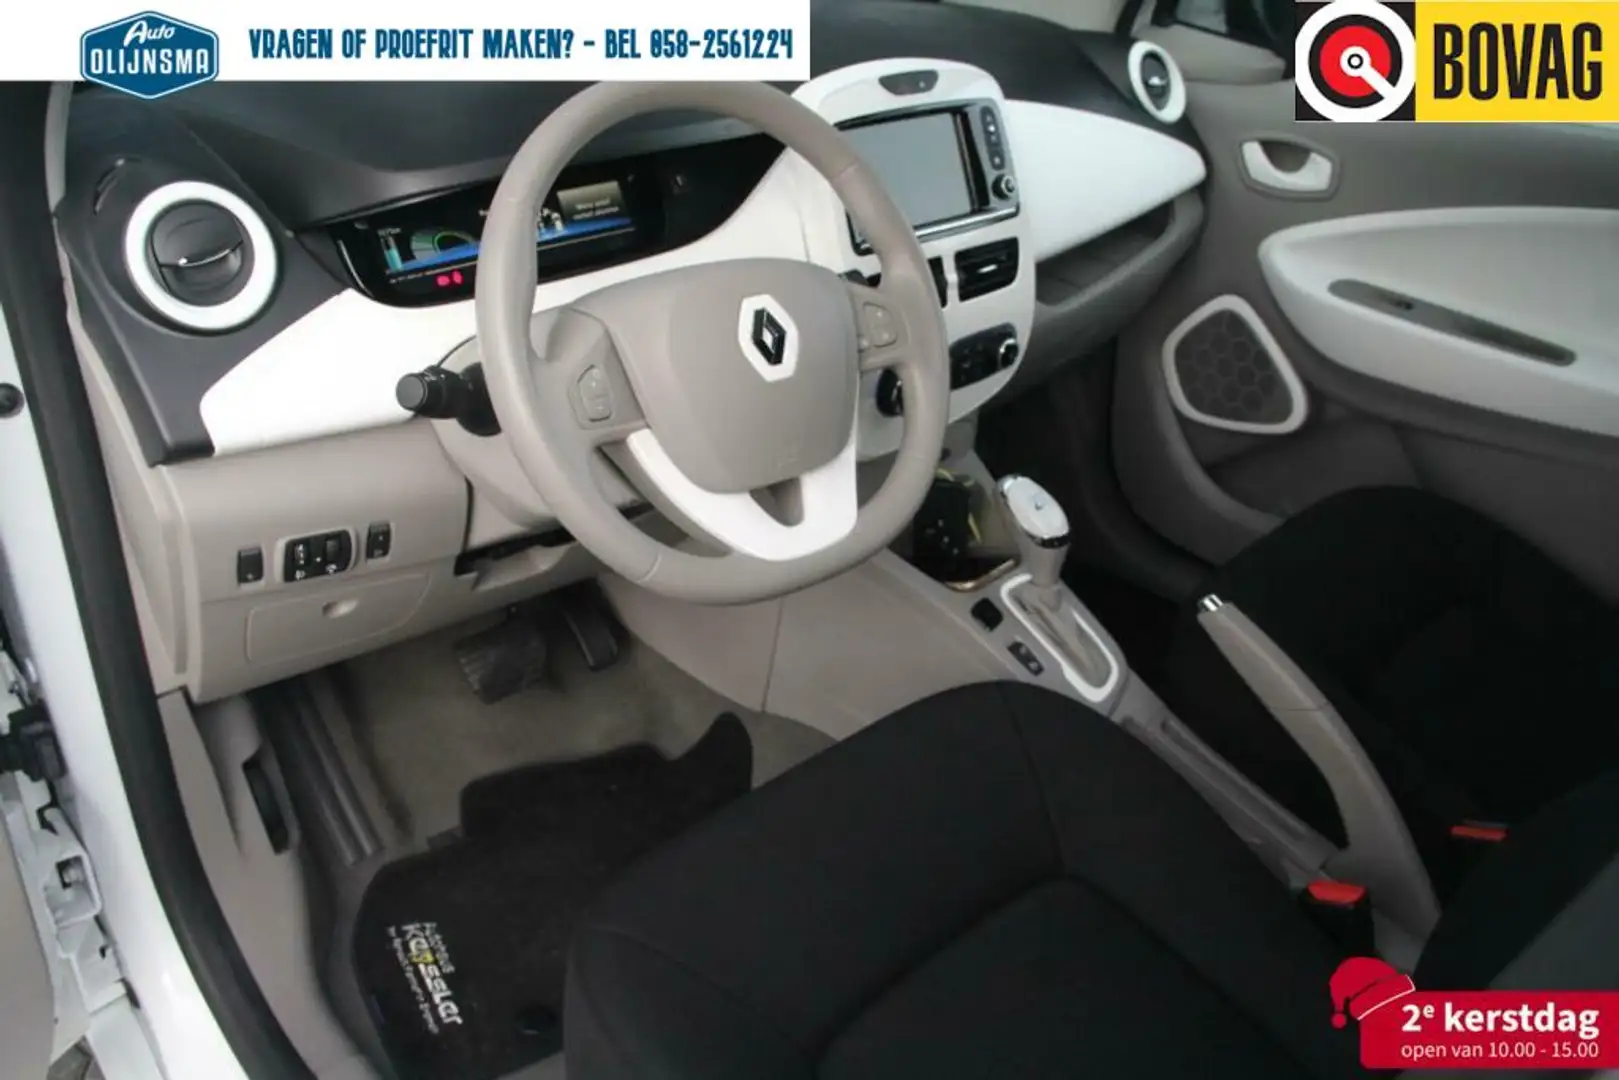 Renault ZOE R90 41 kWh|Accuhuur|Navi|Climate Control|€7.994 in Wit - 2